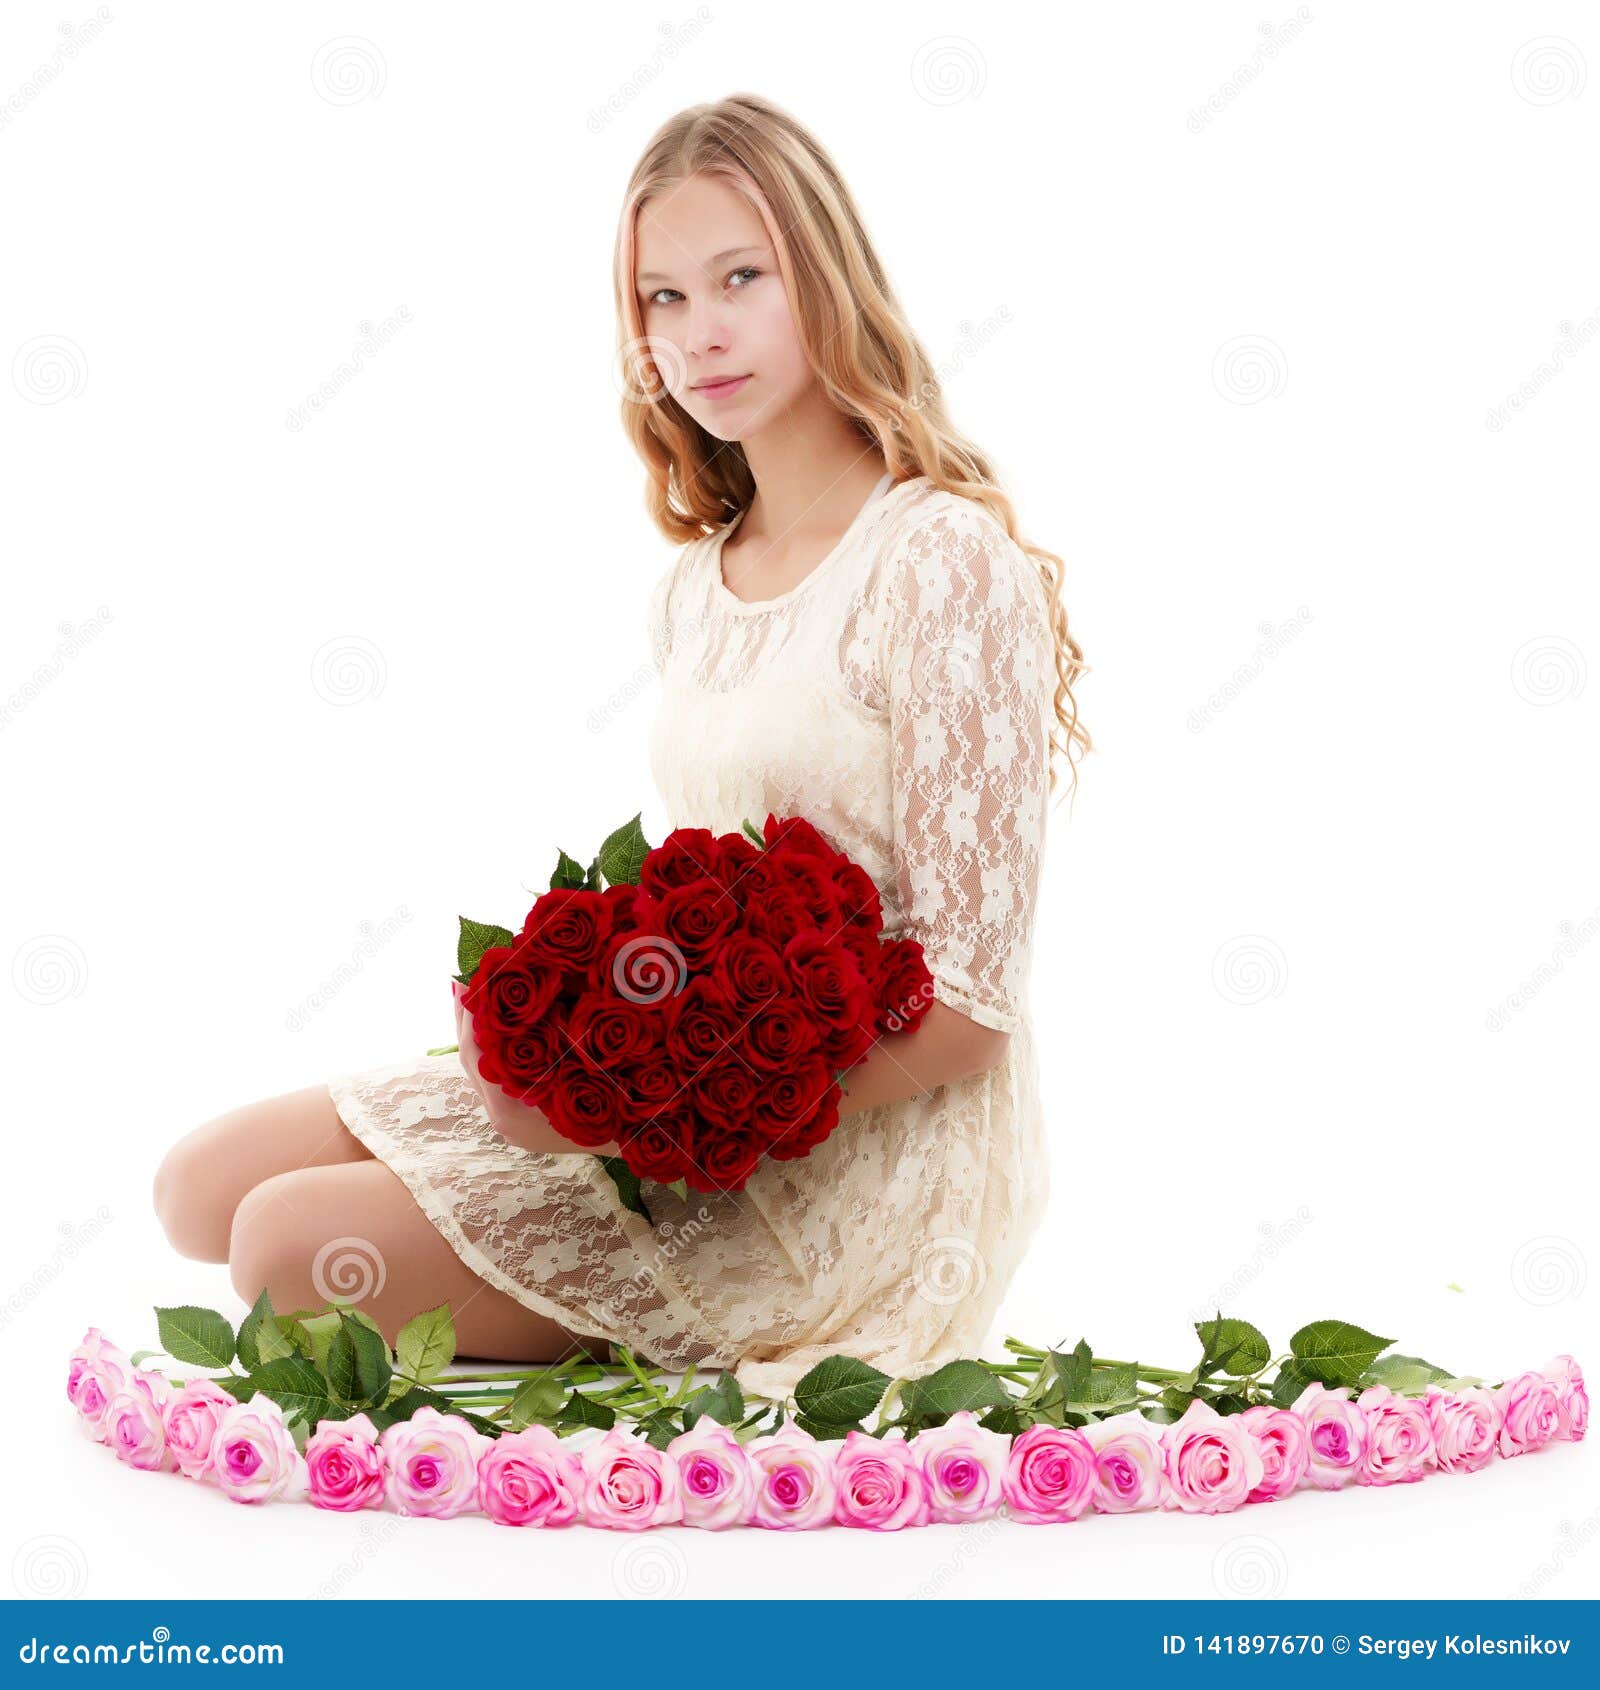 American teen girl with bouquet